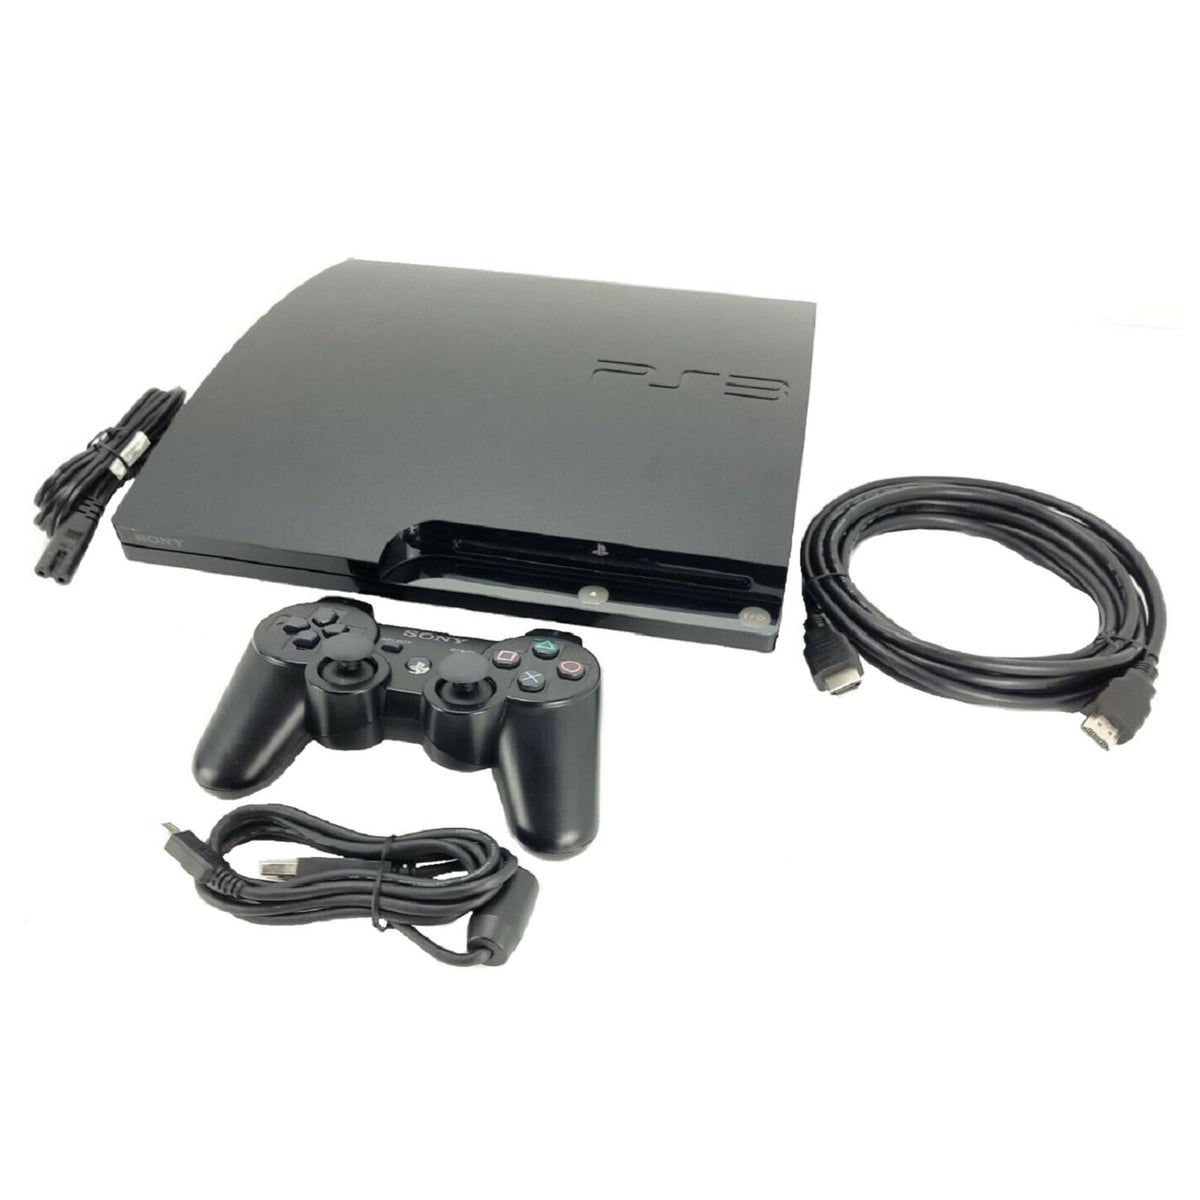 Sony PS3 PlayStation 3 Slim Edition Charcoal Black PS3 CECH-2001A 120GB For  Sale | TekRevolt